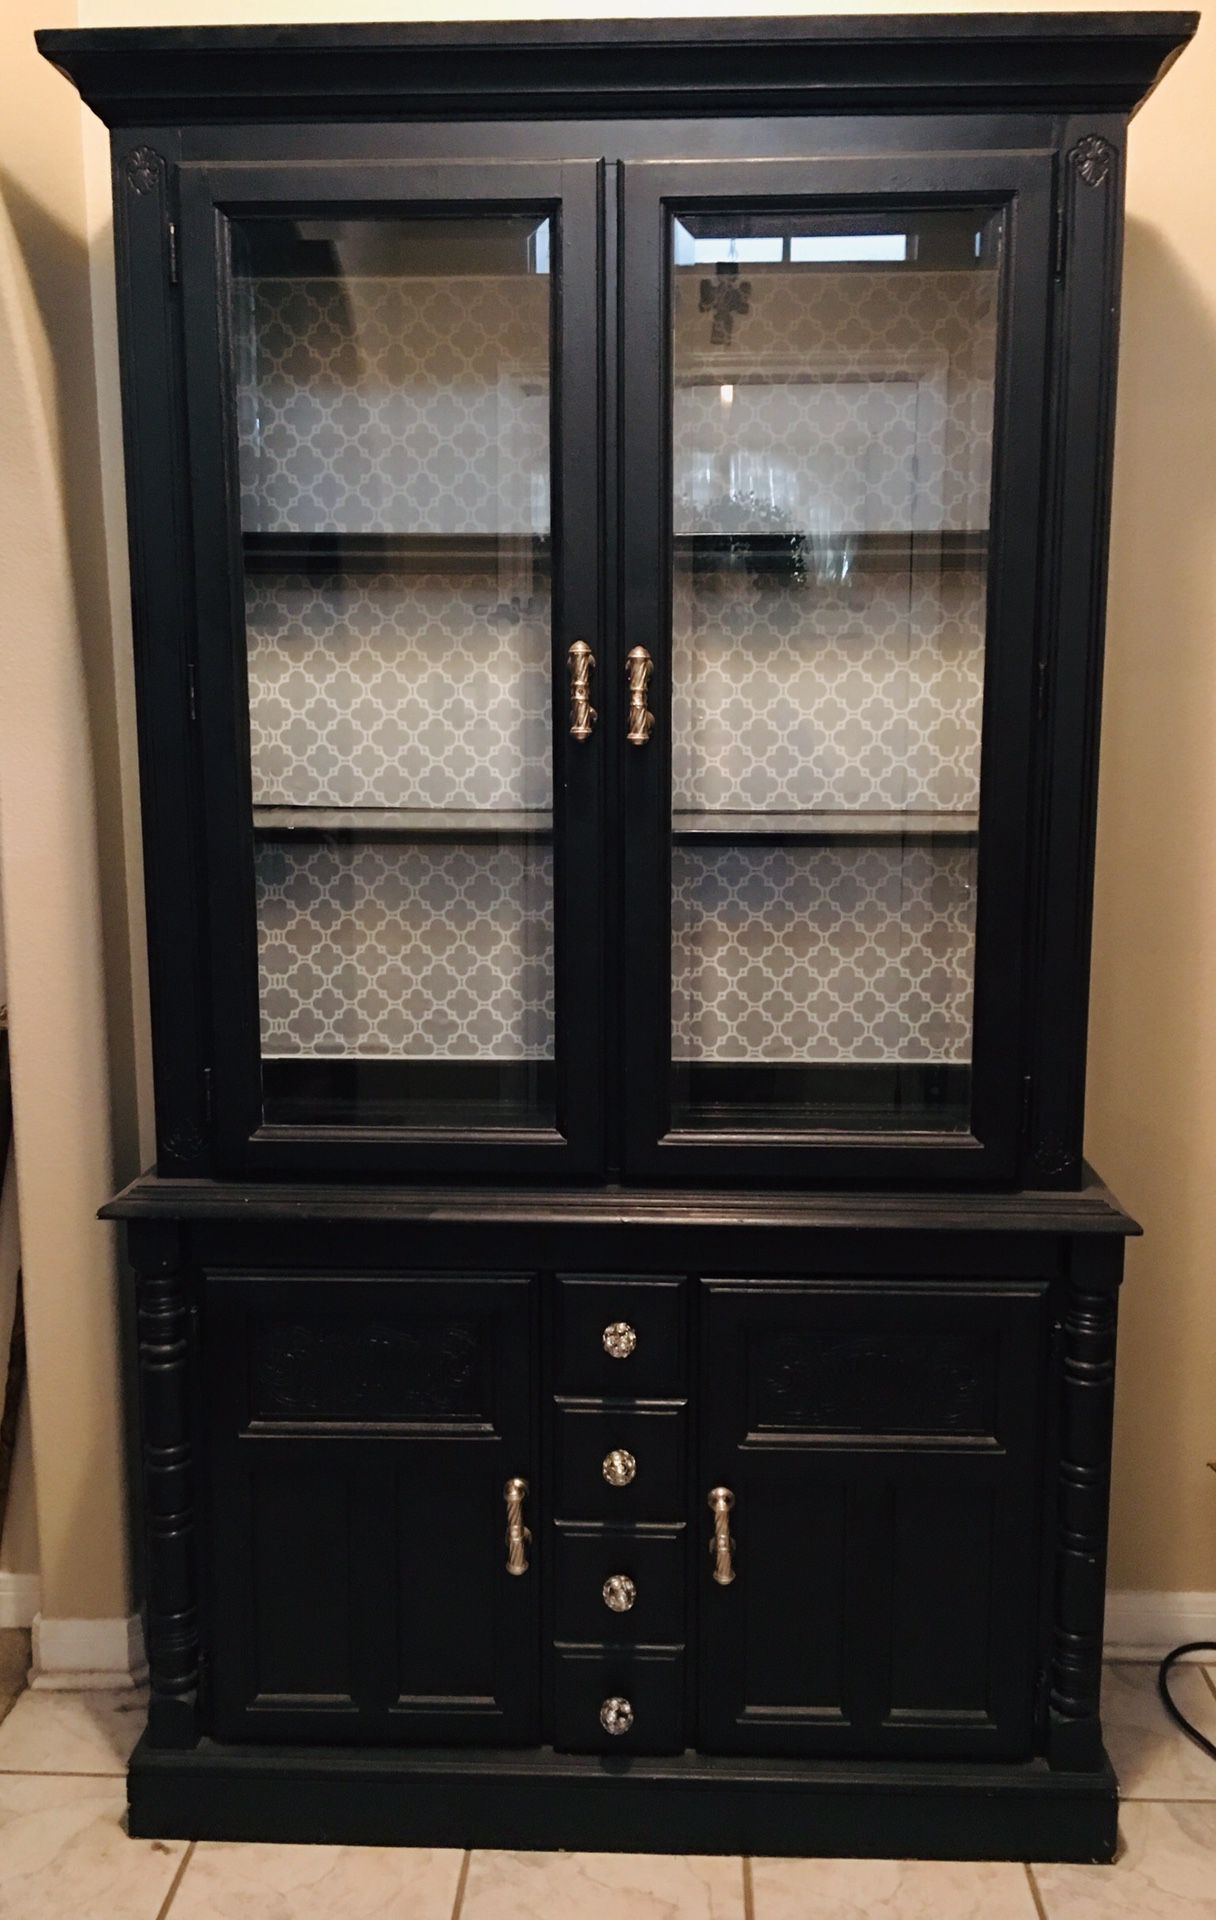 Broyhill Black China Curio Cabinet - Pending Pick Up